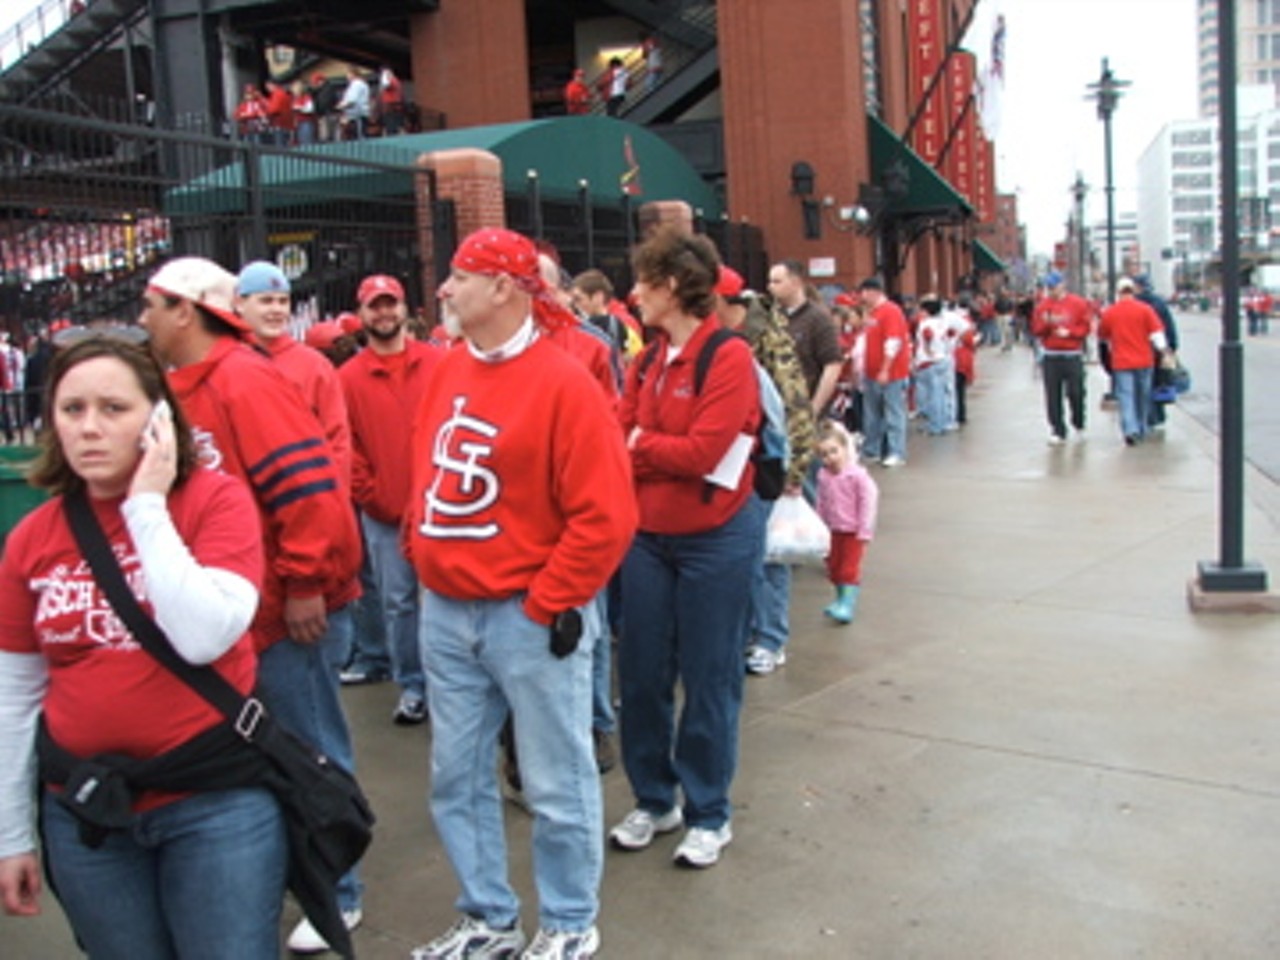 The ticket line stretched out during the first inning.